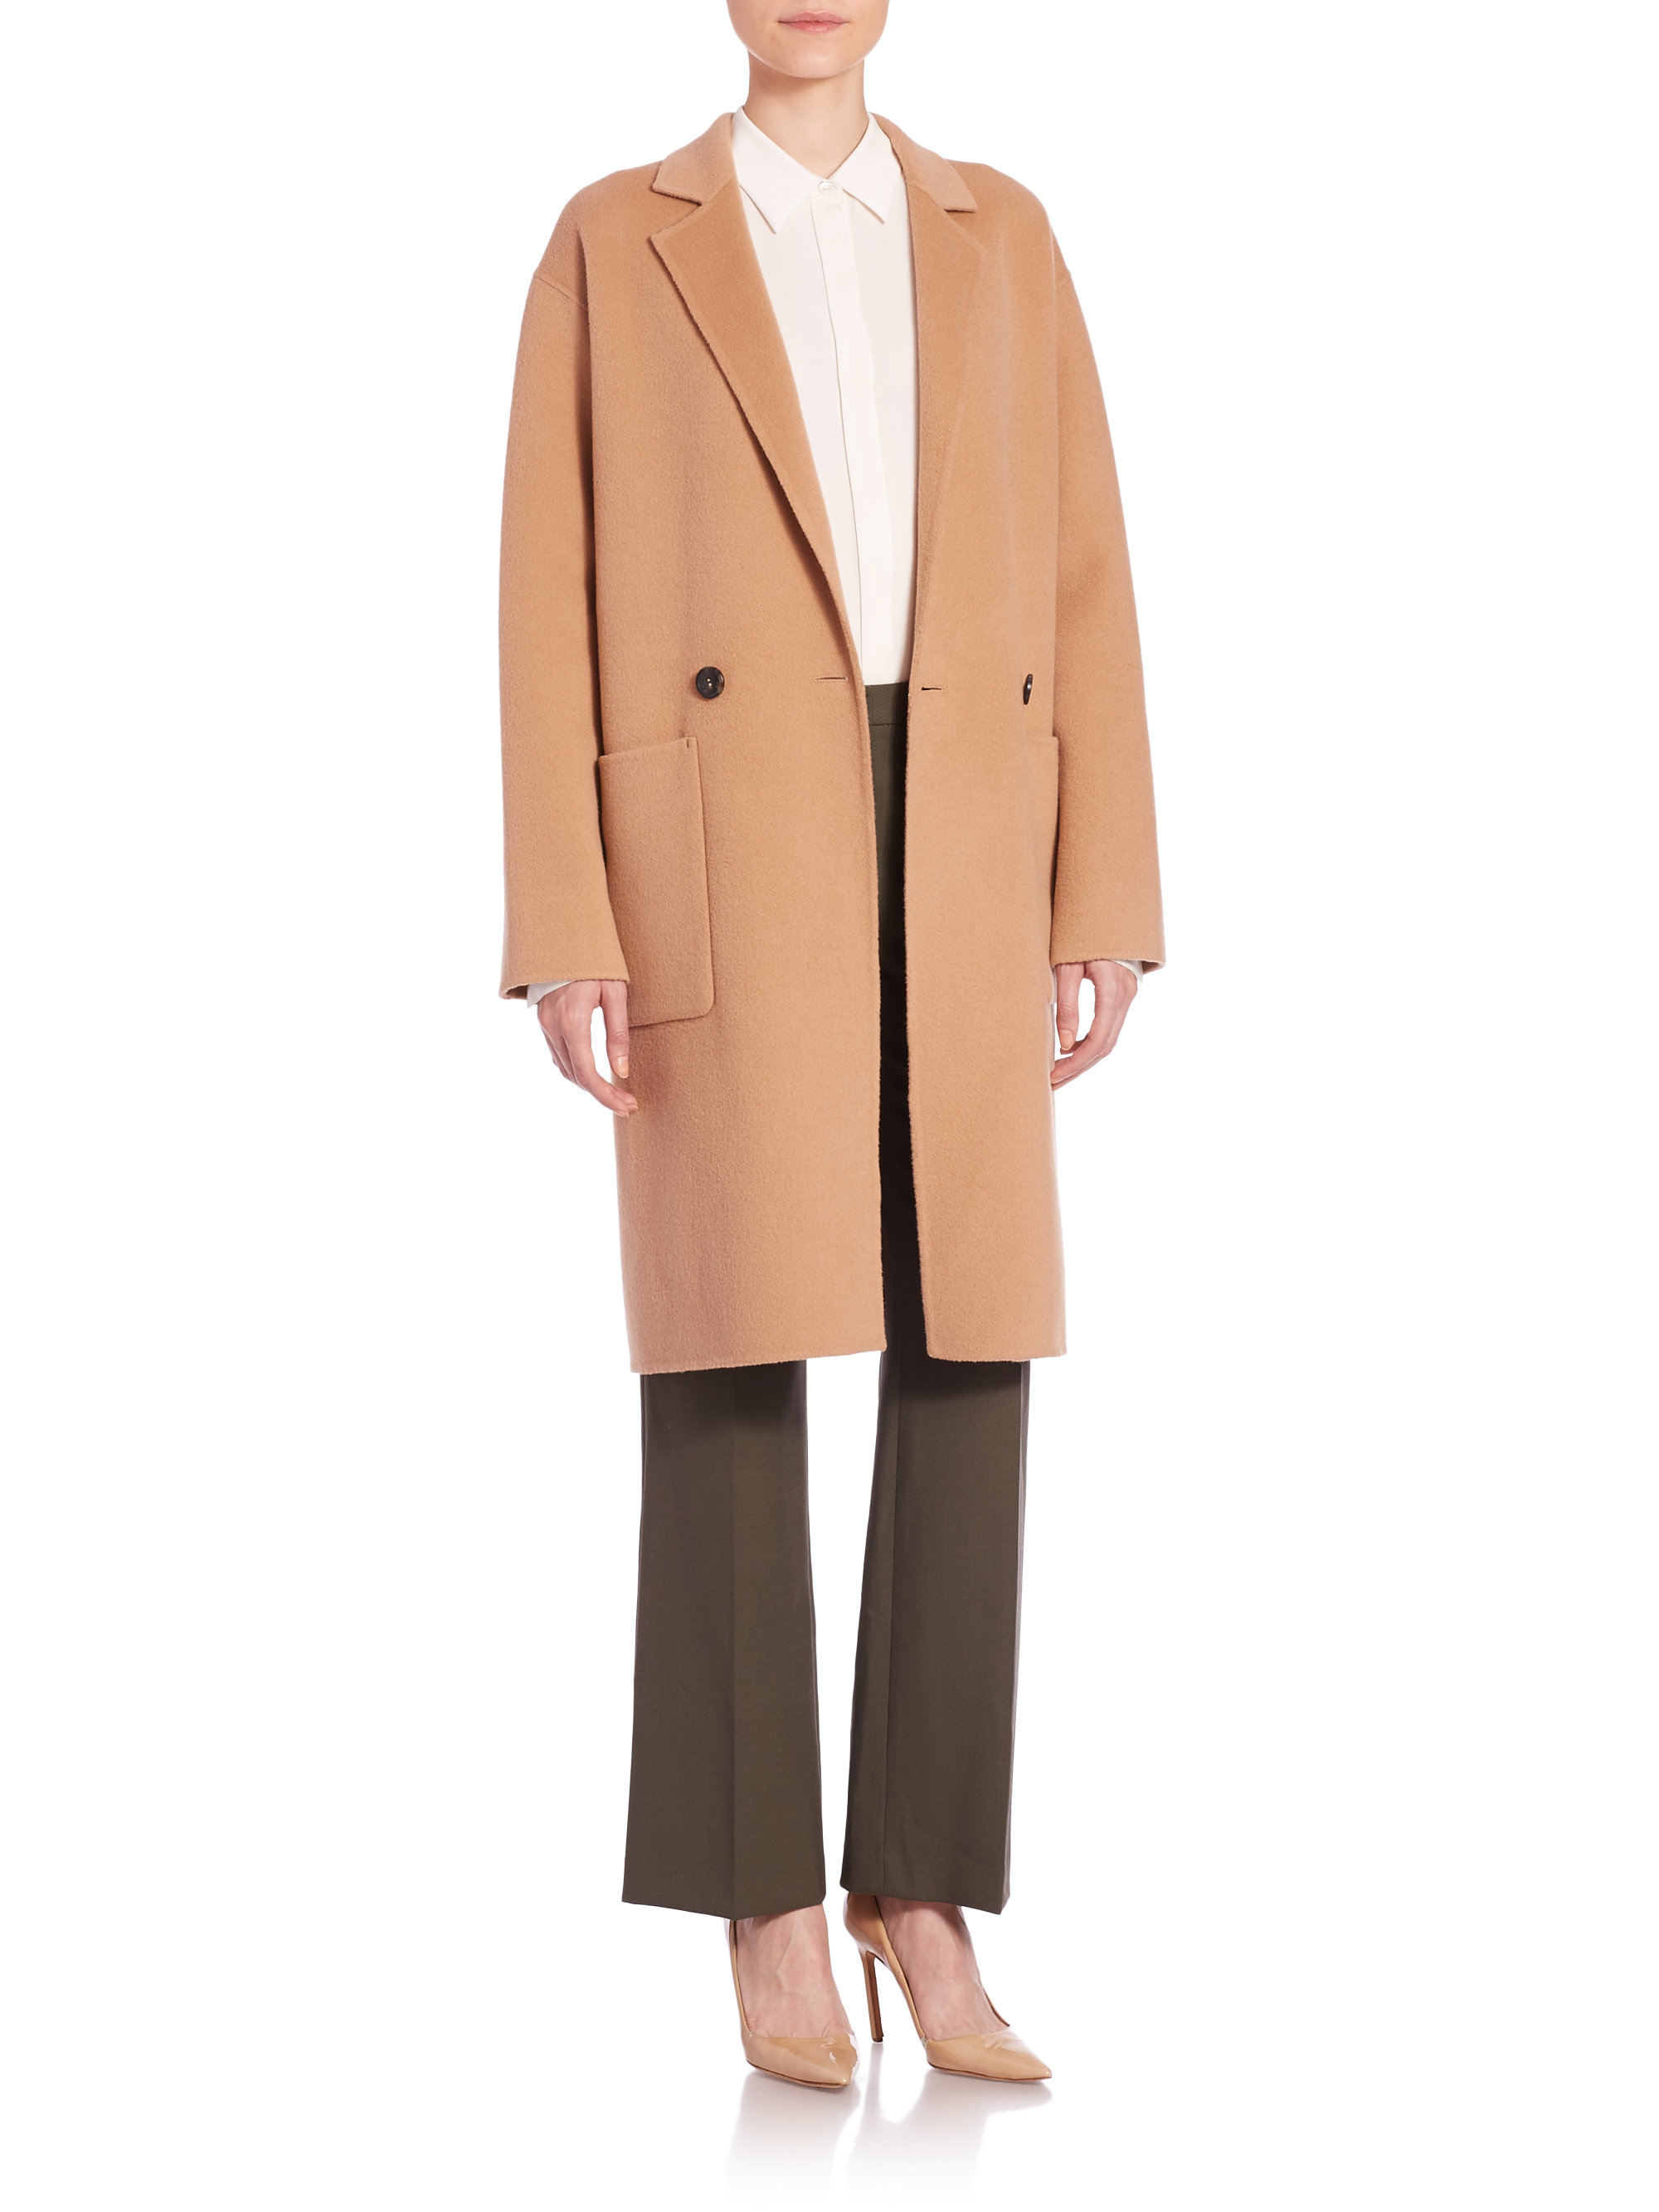 Theory Eletkah Wool & Cashmere Coat in Natural | Lyst